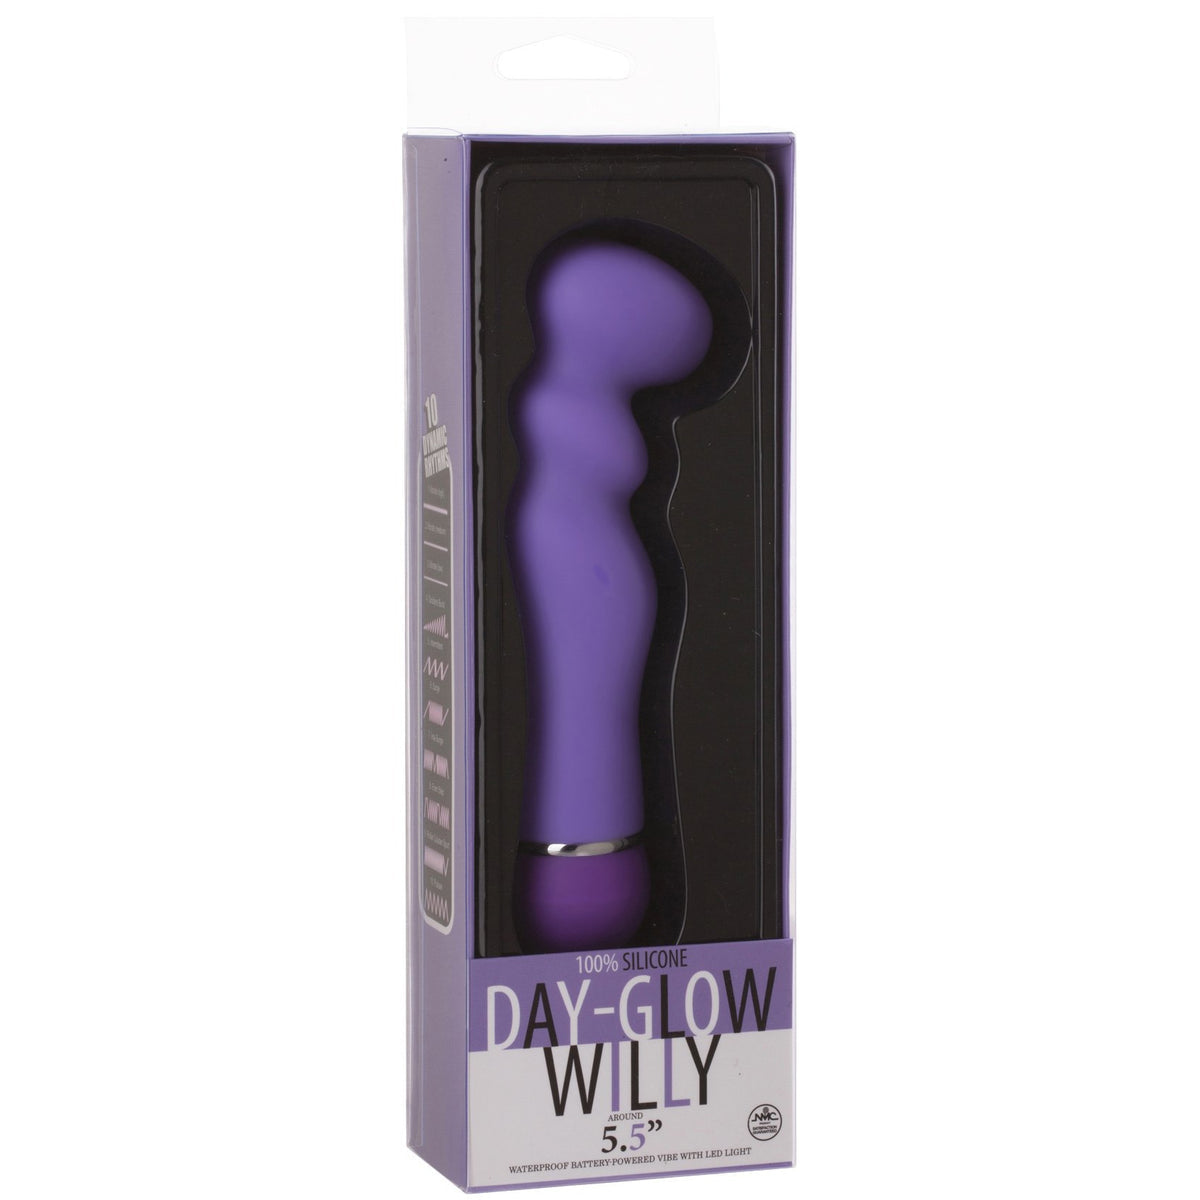 5.5" Day-Glow Willy G-Spot Vibrator - Purple - Thorn & Feather Sex Toy Canada